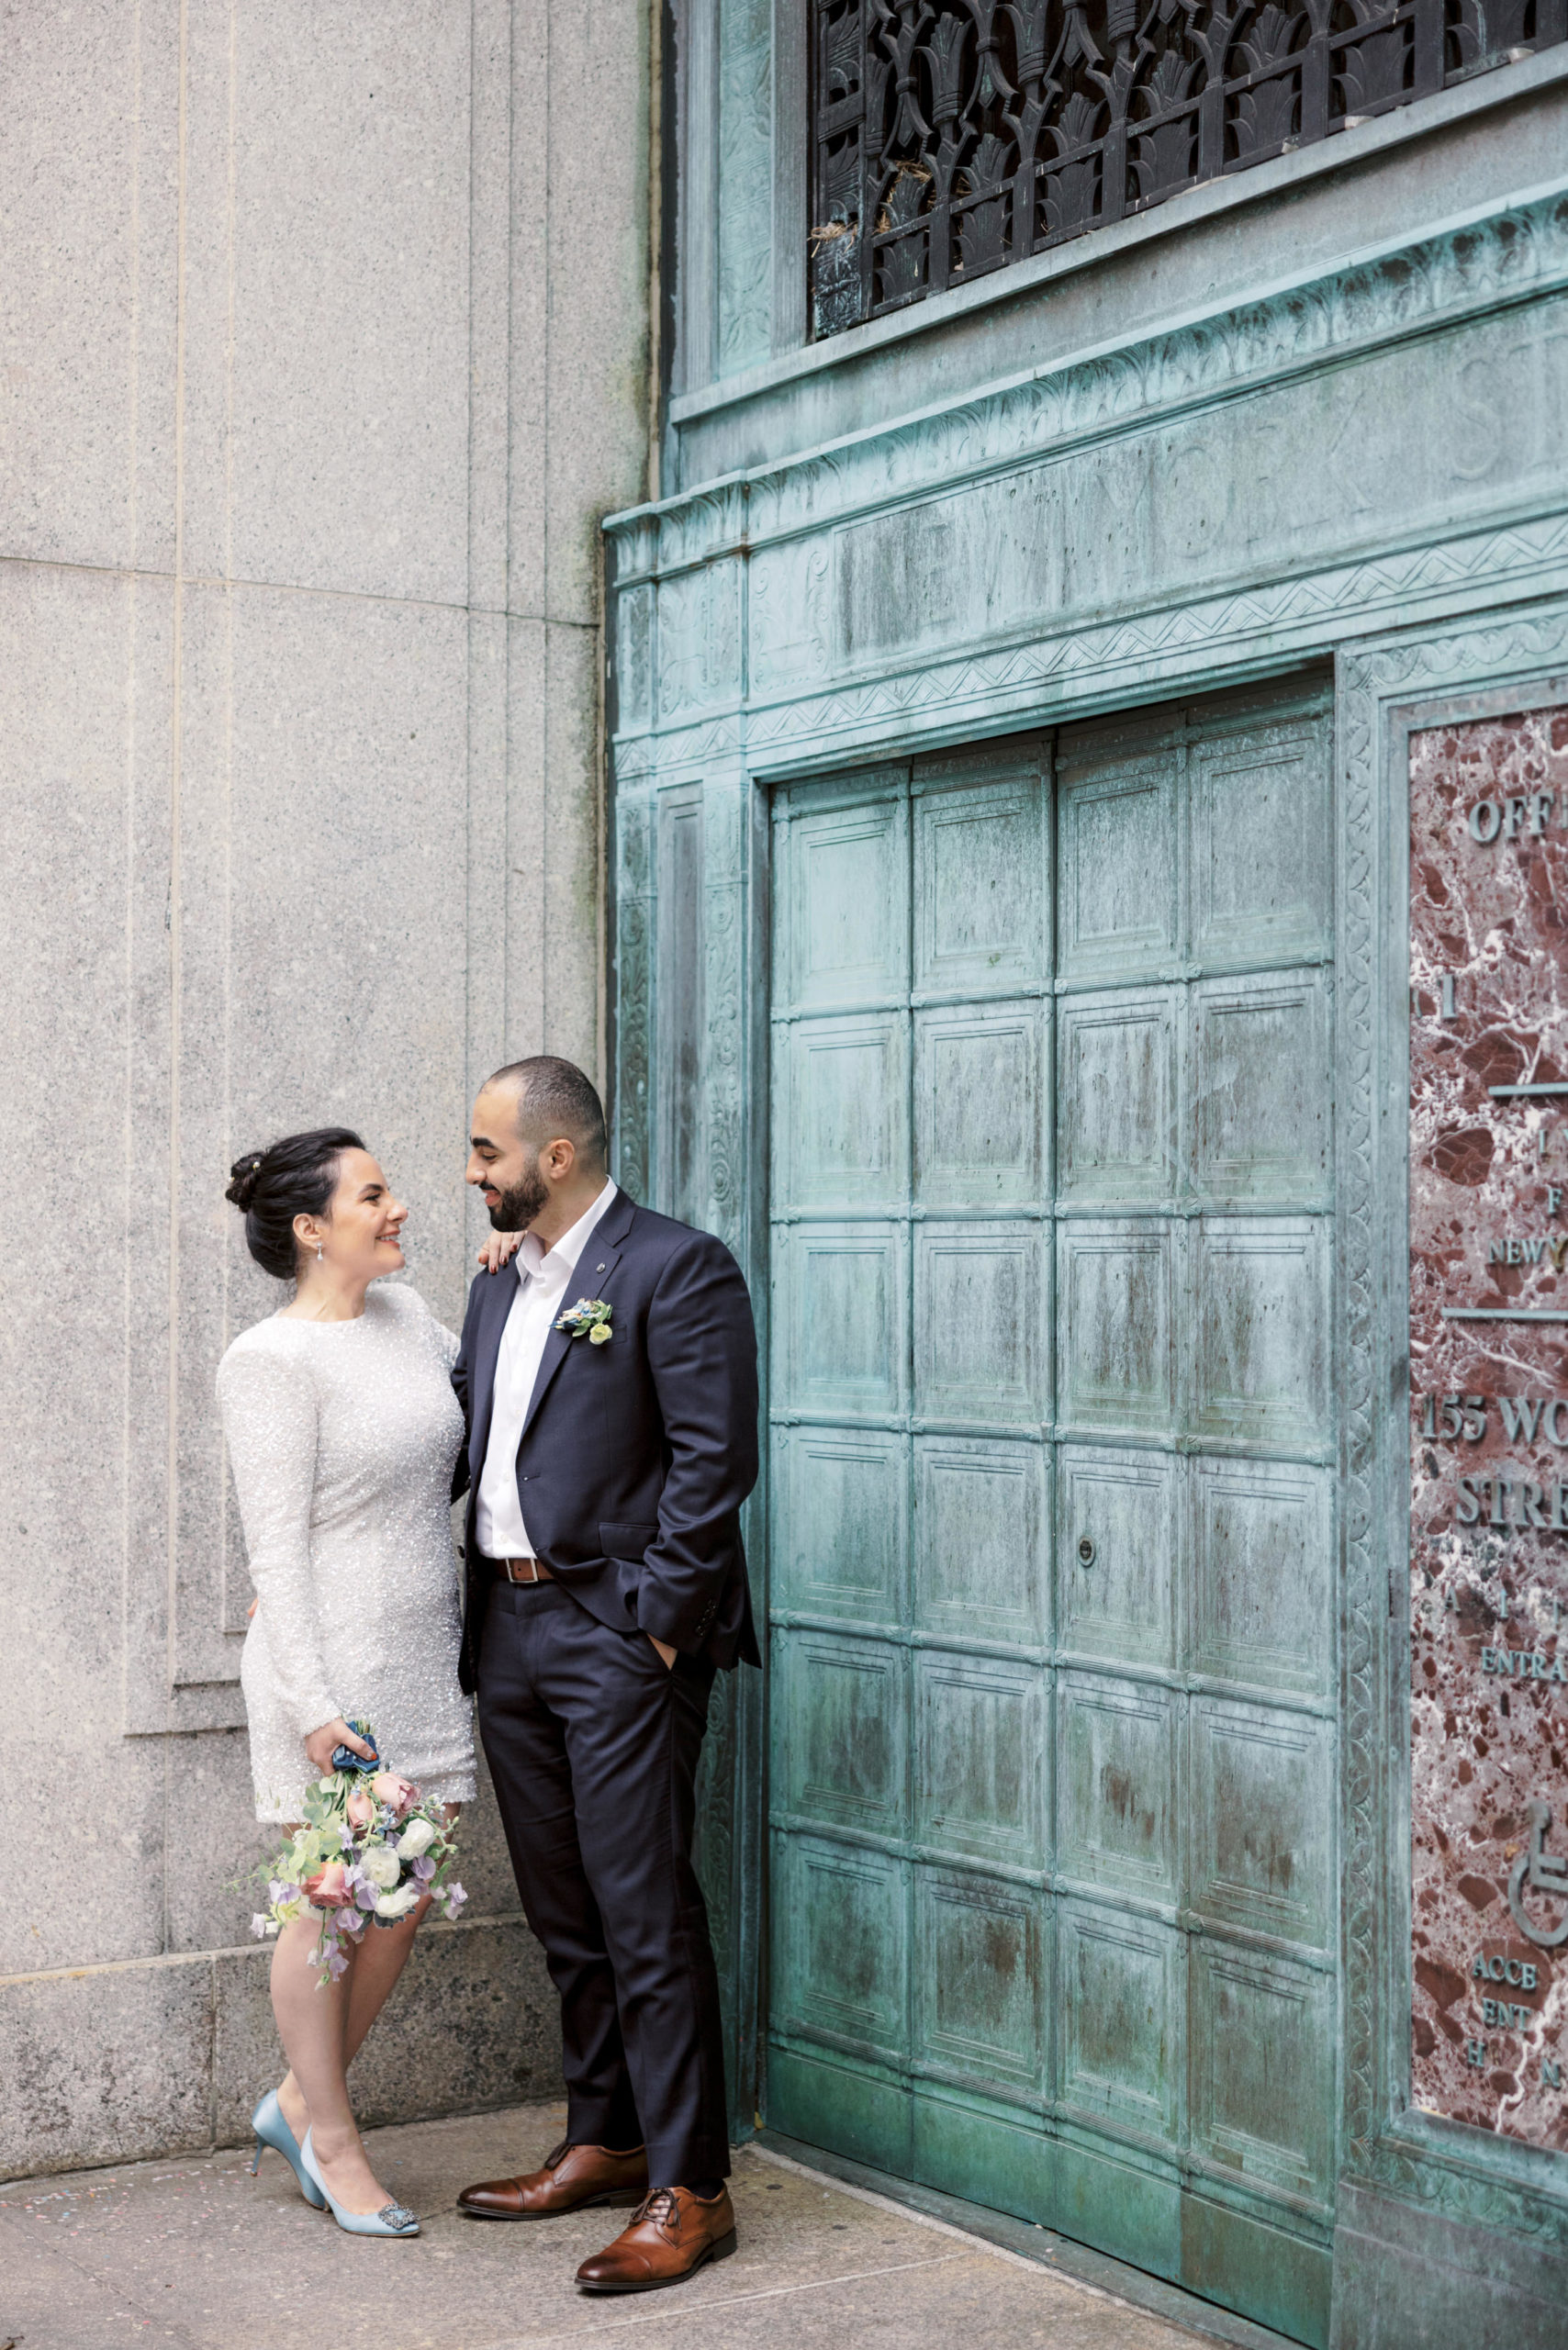 The bride and groom are happily staring at each other's eyes after their city hall elopement. Image by Jenny Fu Studio NYC